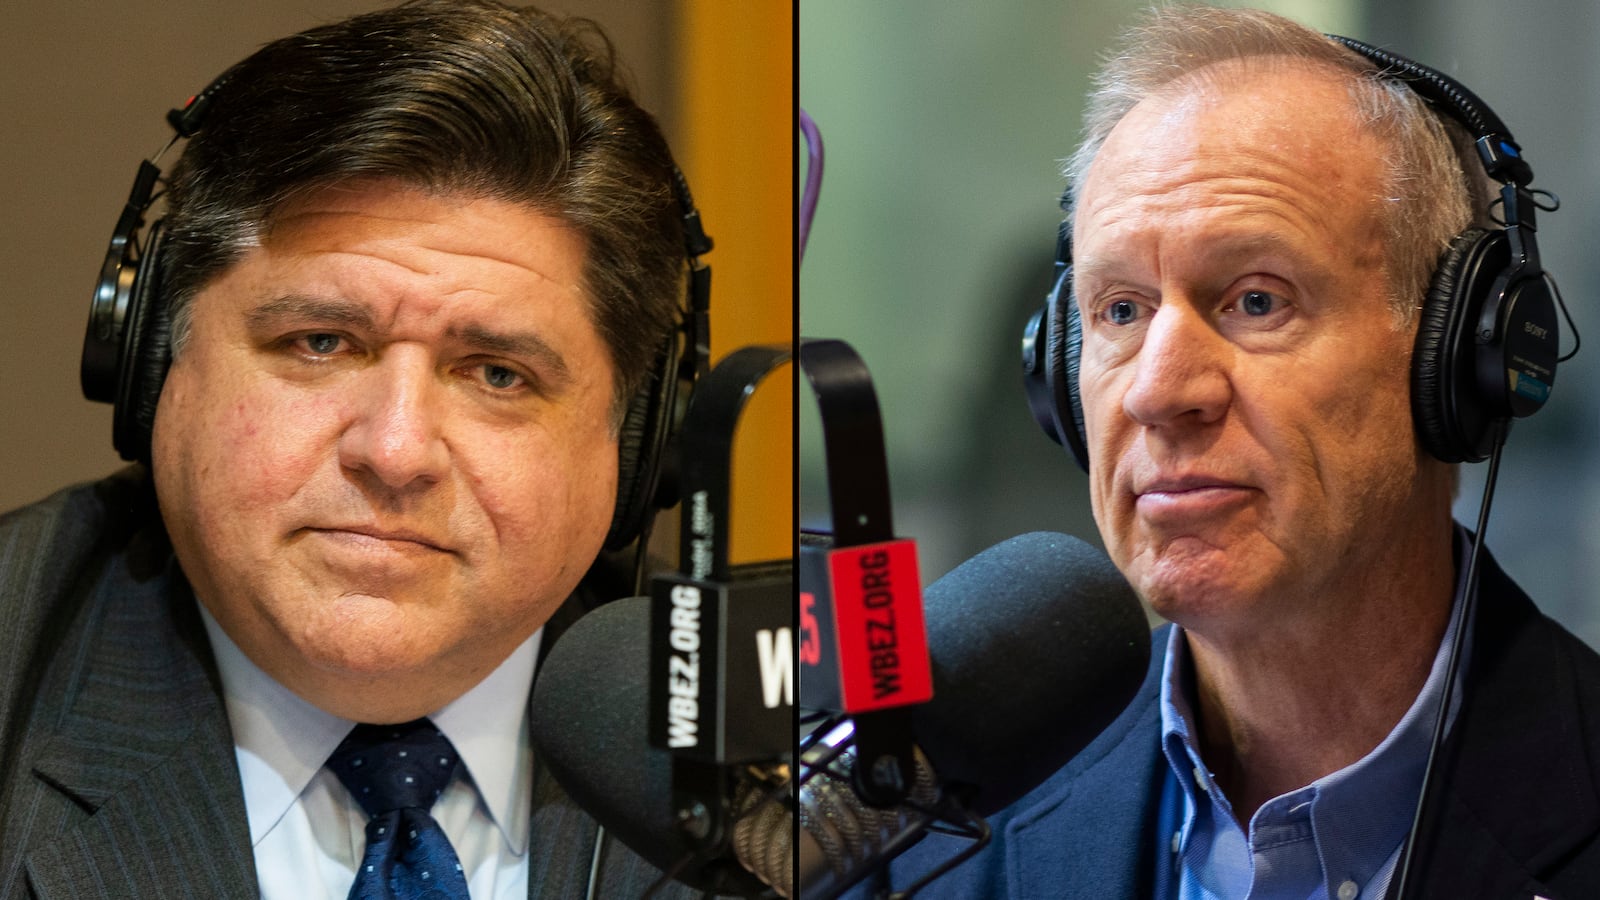 Democratic candidate J.B. Pritzker, left, and Gov. Bruce Rauner talked education policy with Chalkbeat Chicago and WBEZ education for the series Testing the Candidates.